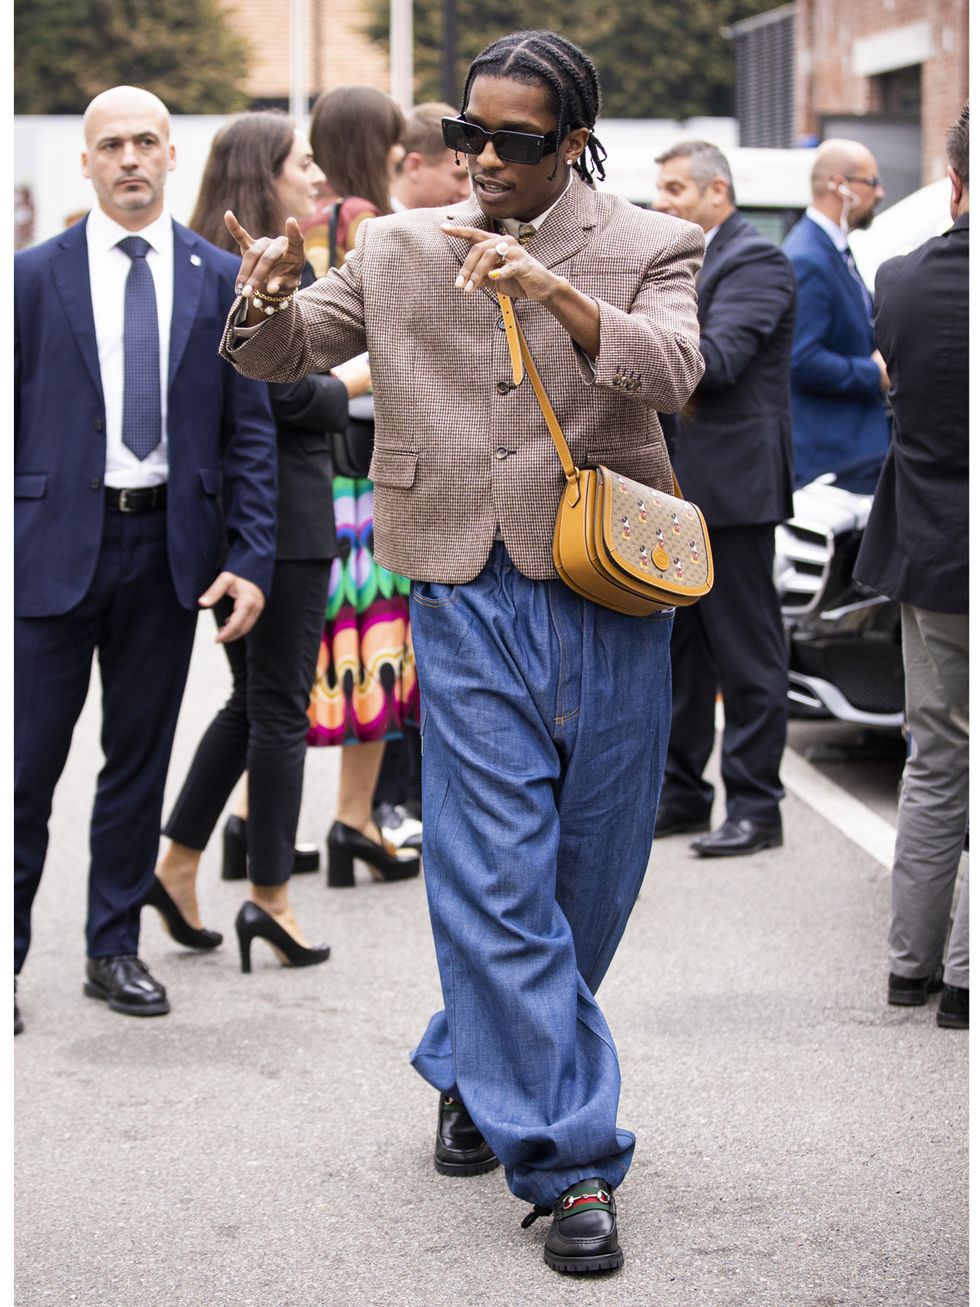 milan, italy   september 22  asap rocky, wearing brown blazer, blue jeans, gucci bag and gucci shoes, is seen outside the gucci show during milan fashion week springsummer 2020 on september 22, 2019 in milan, italy photo by claudio laveniagetty images